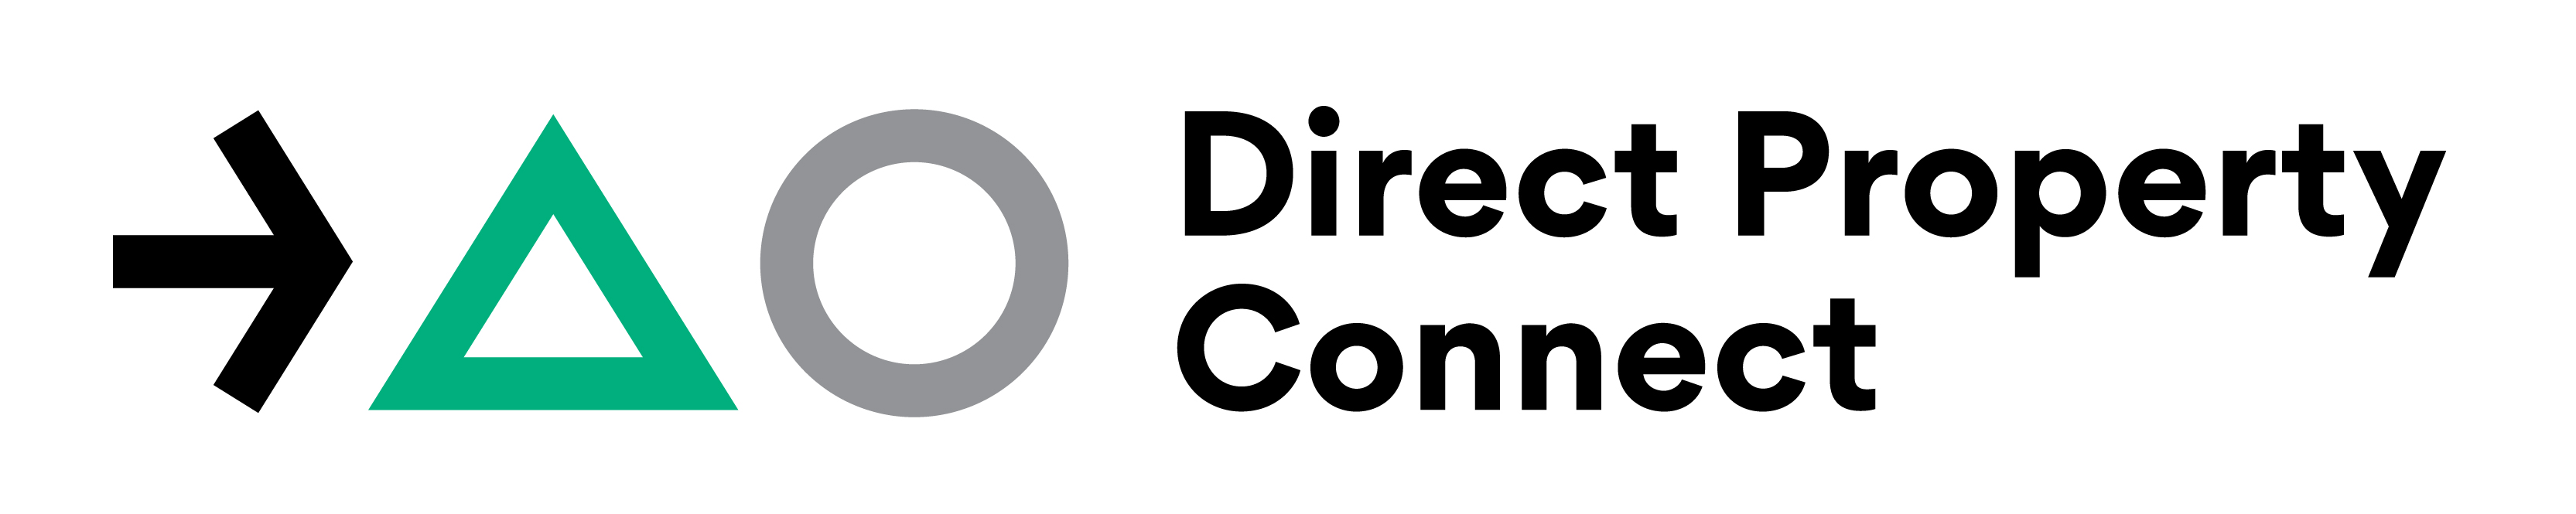 Direct Property Connect